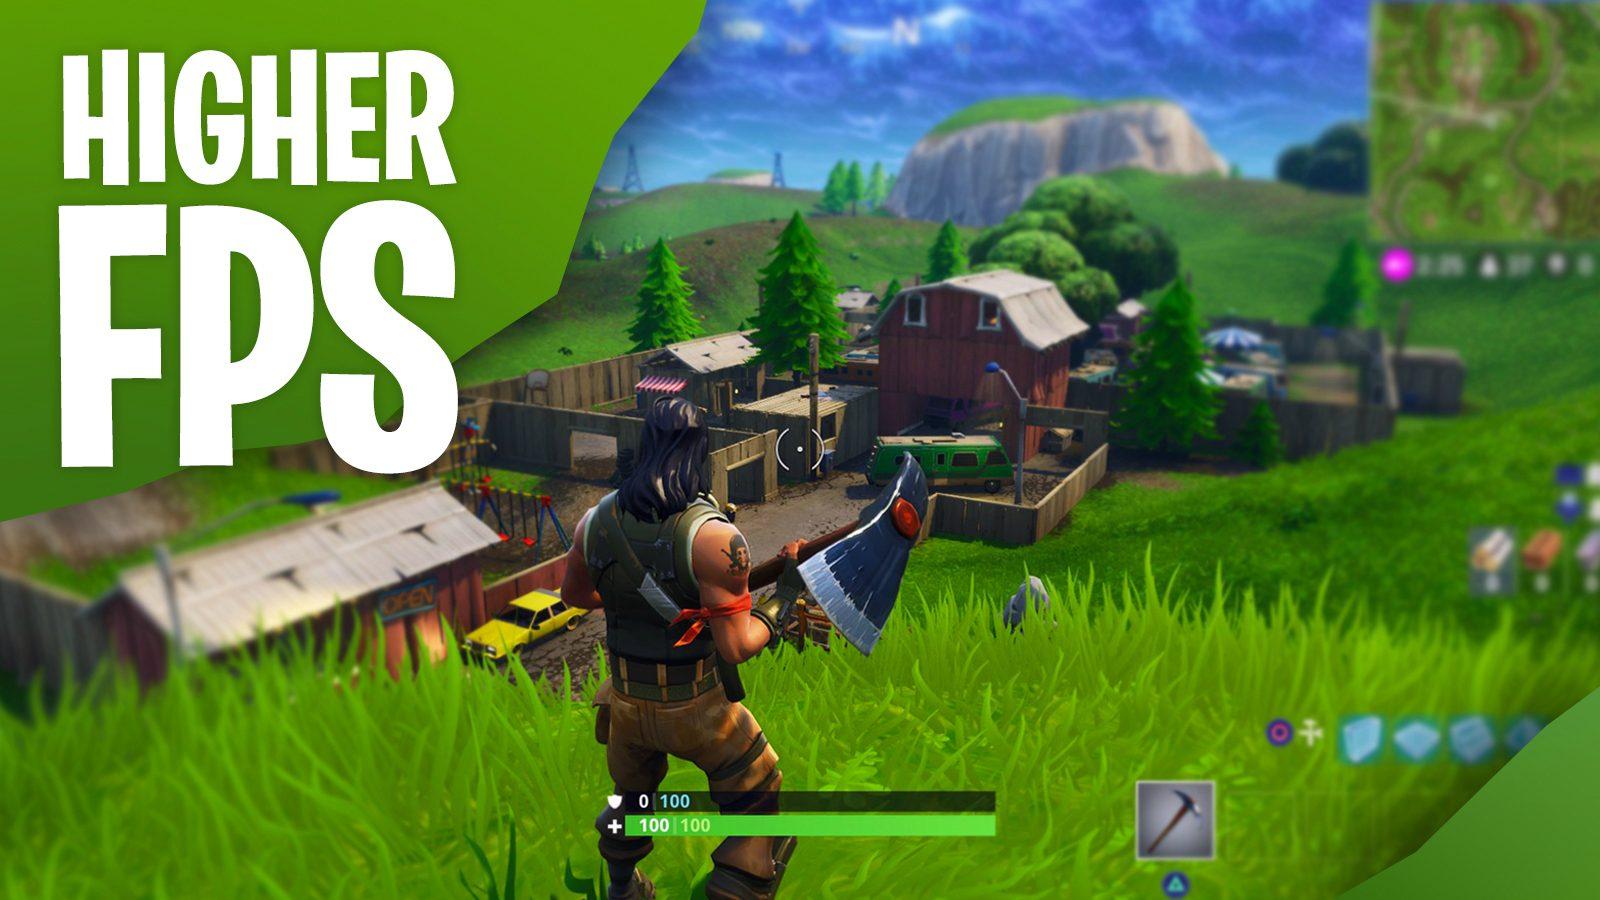 Fortnite: How to get higher FPS and reduce lag on PC, PS4 and Xbox